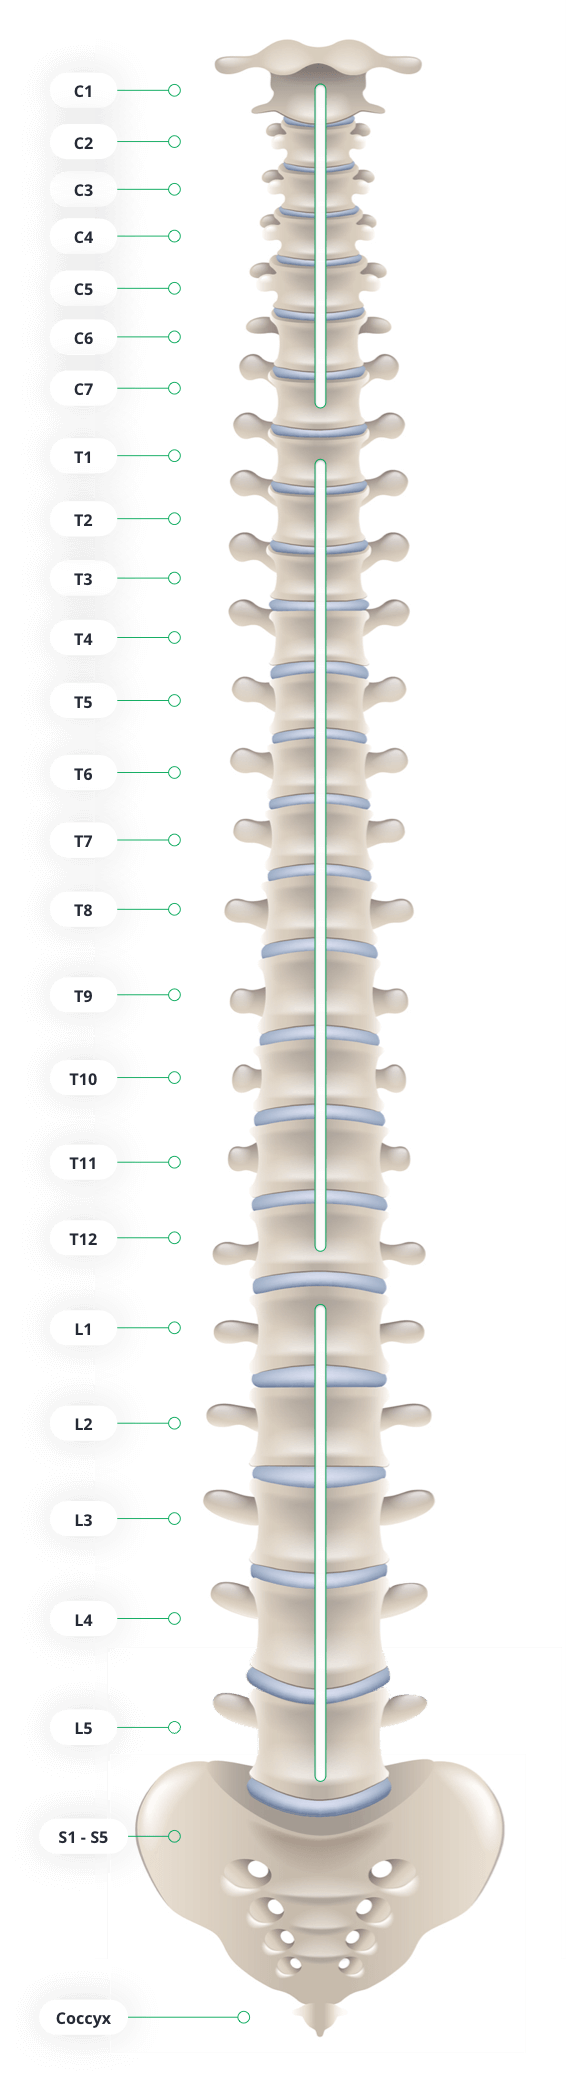 Spinal Cord Injury Levels